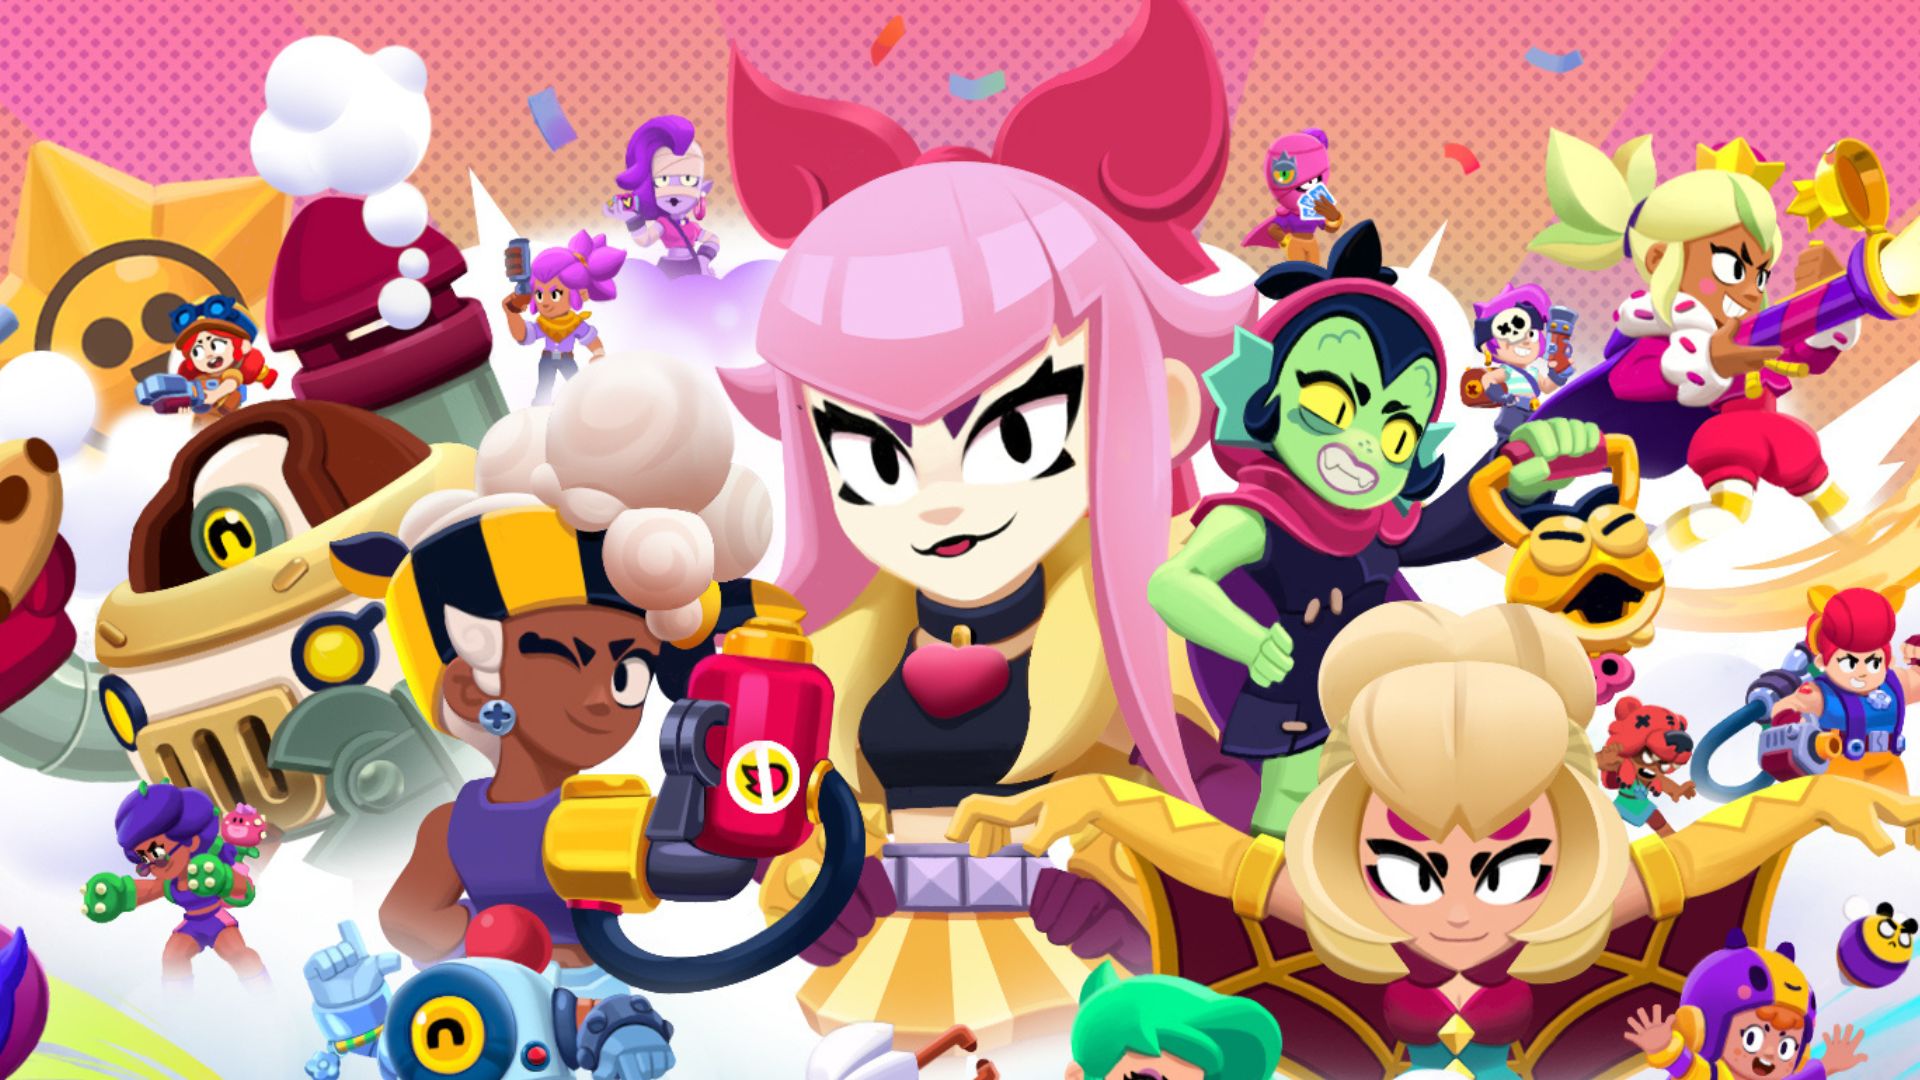 Fight like a girl this International Women's Day in Brawl Stars